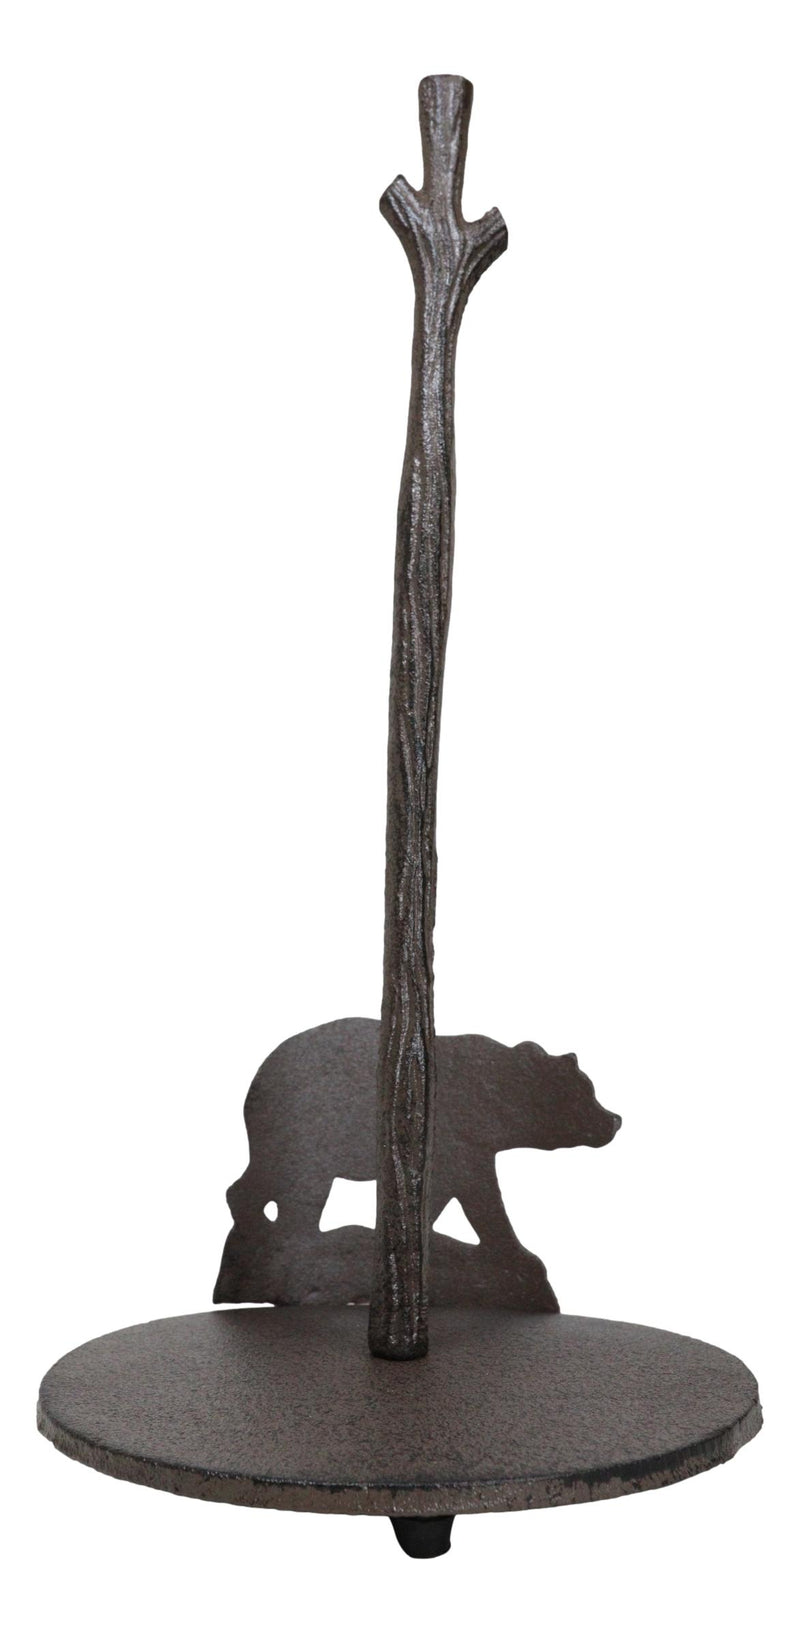 Rustic Cast Iron Western Forest Black Bear Strolling Paper Towel Holder Stand